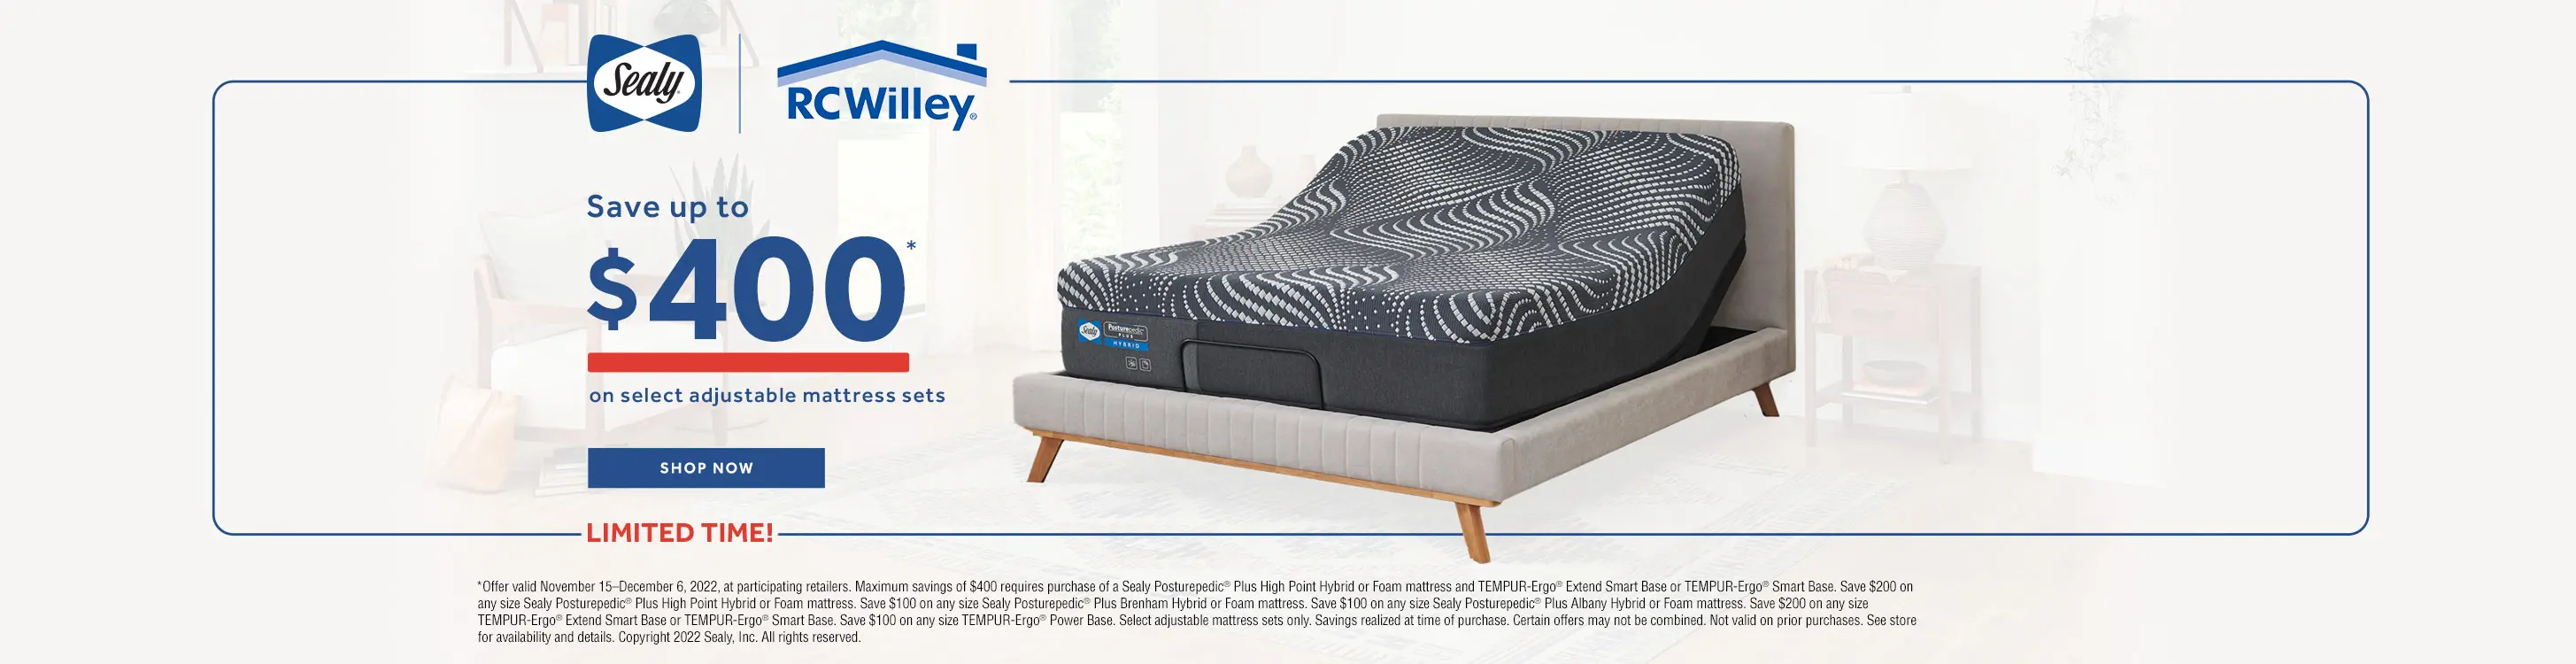 Save up to $400 on select Sealy adjustable mattress sets. Offer valid November 15th to December 6th.